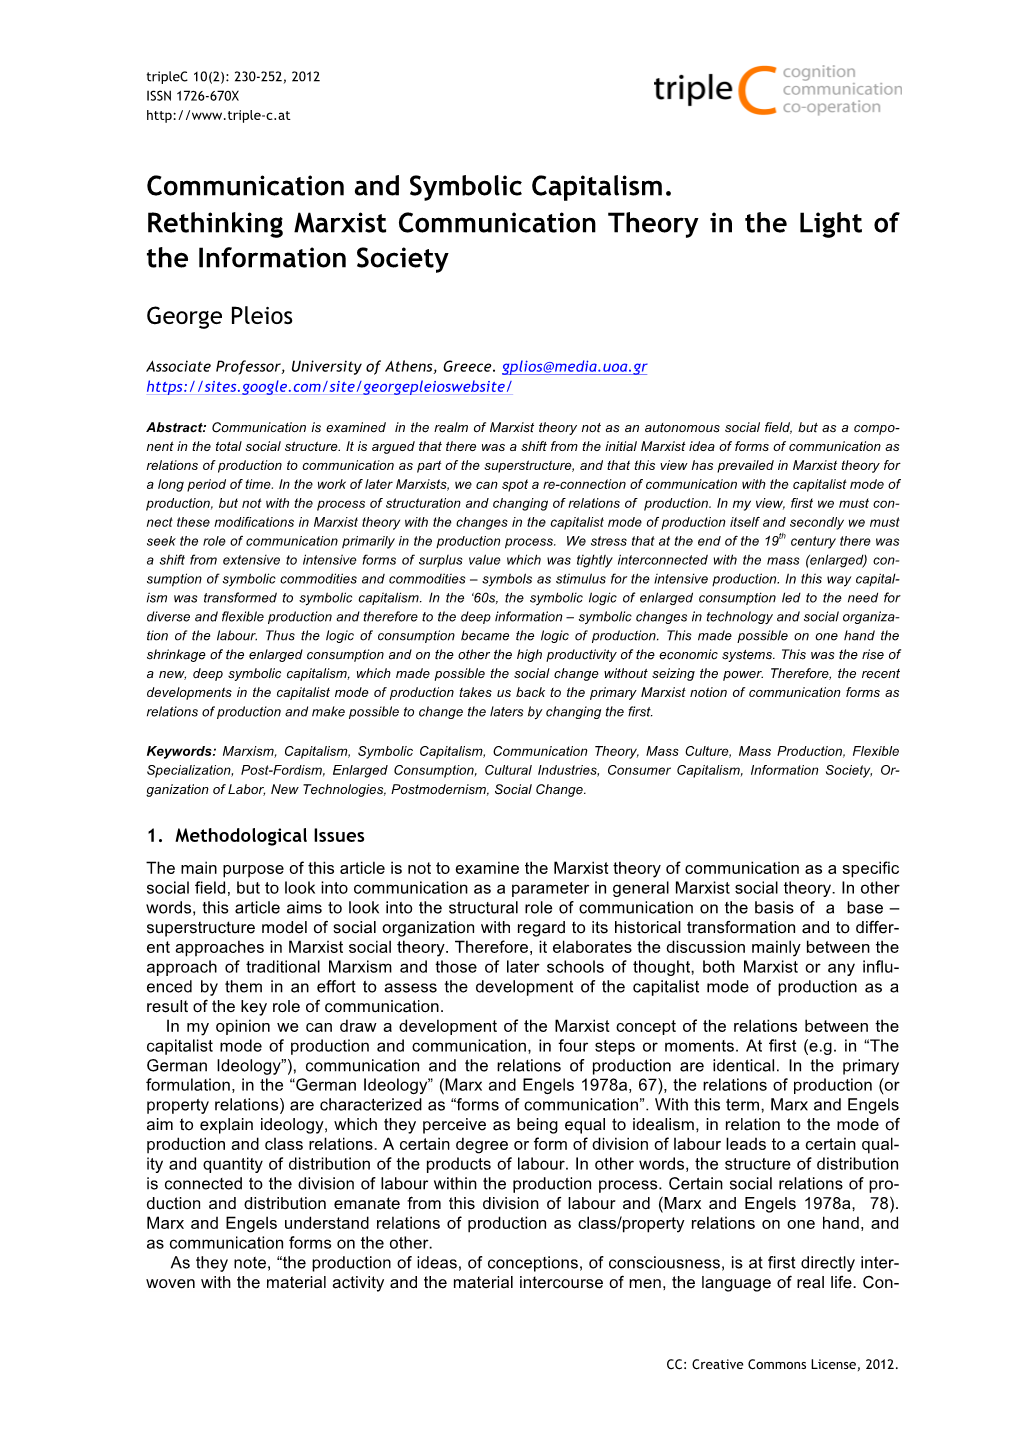 Communication and Symbolic Capitalism. Rethinking Marxist Communication Theory in the Light of the Information Society